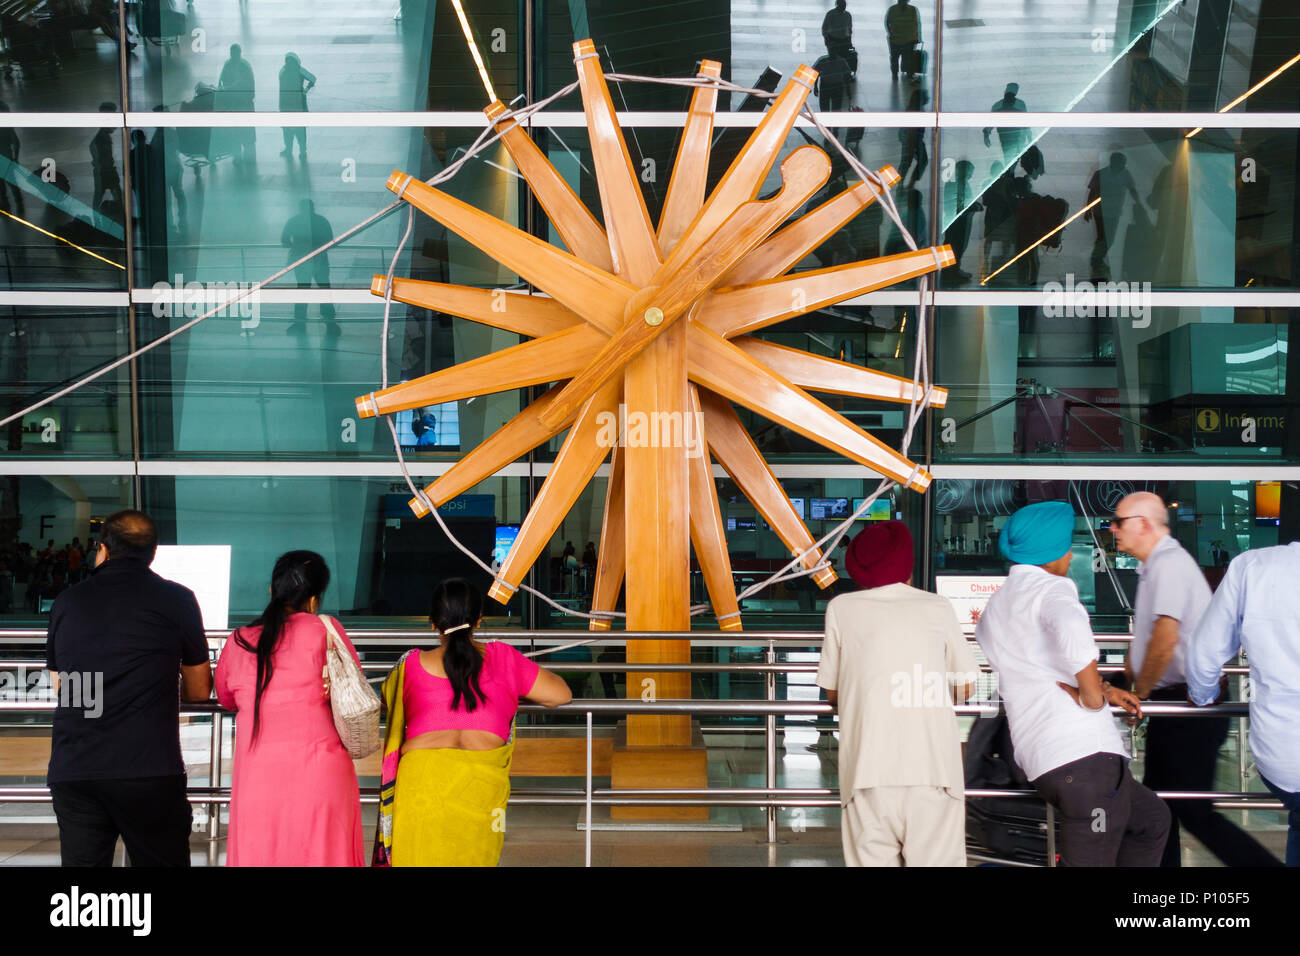 NEW DELHI, INDIA - CIRCA APRIL 2017: People stand in front of the world's largest charkha (spinning wheel) at Indira Gandhi International Airport. Stock Photo